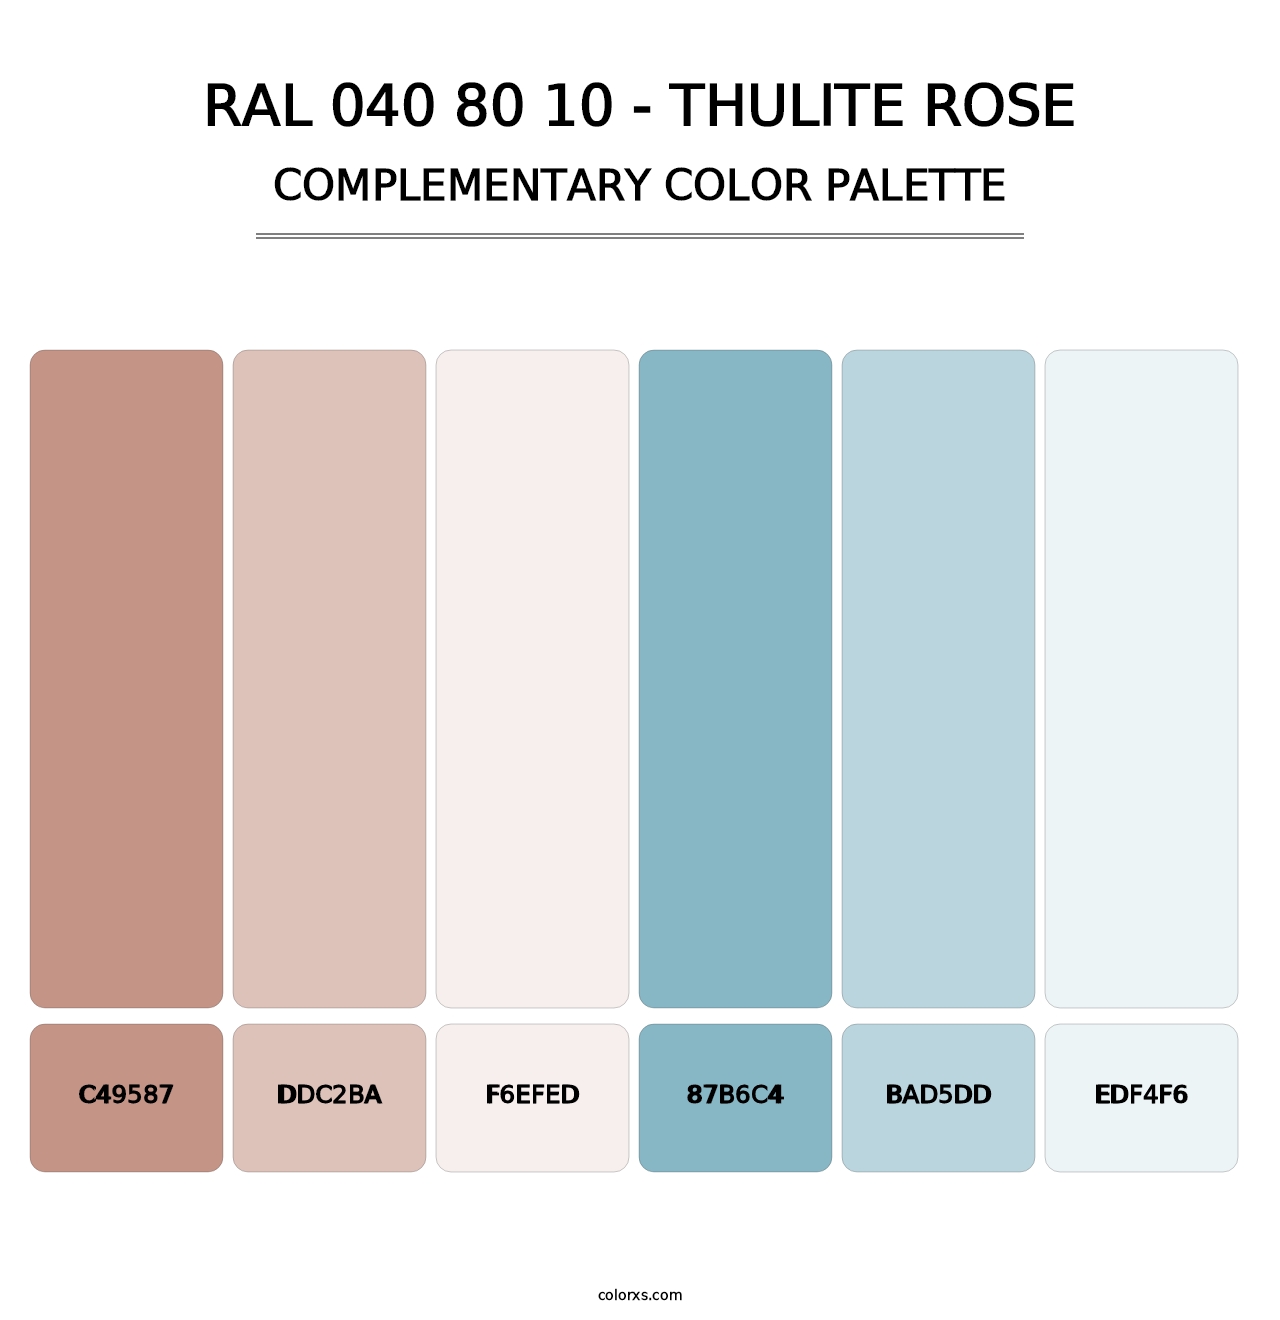 RAL 040 80 10 - Thulite Rose - Complementary Color Palette